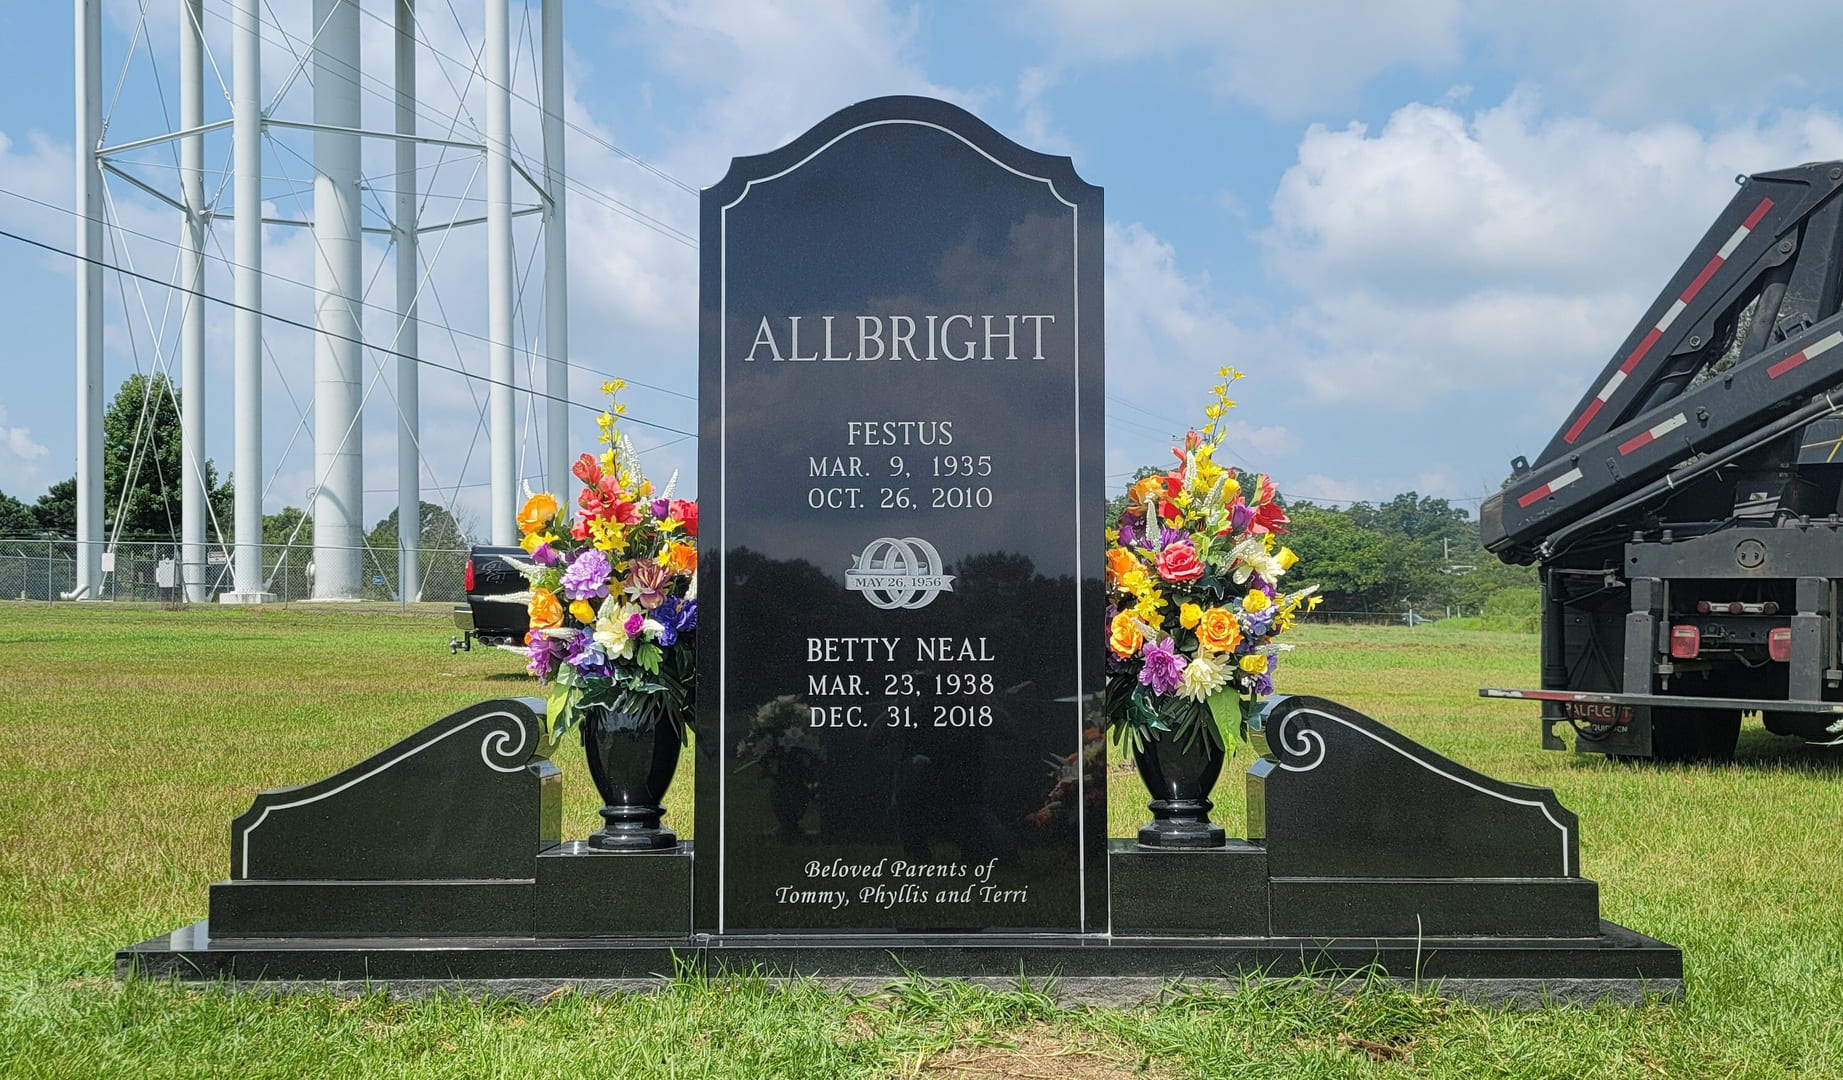 A memorial slab for Festus and Betty Neal